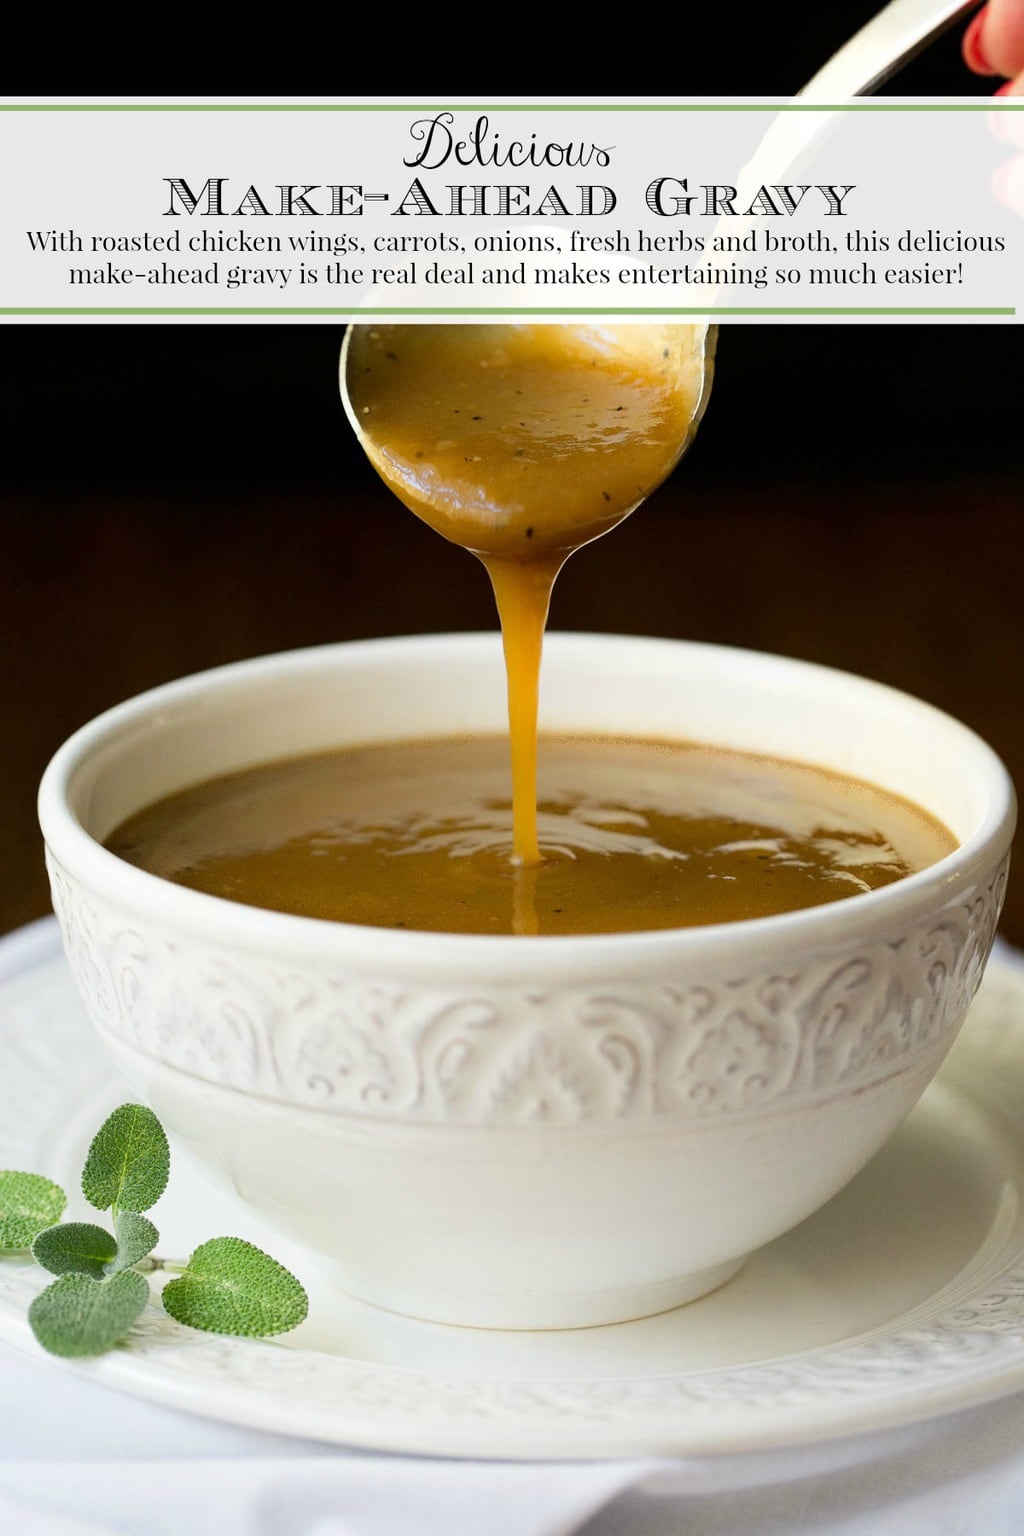 Delicious Make-Ahead Gravy (the real deal!)